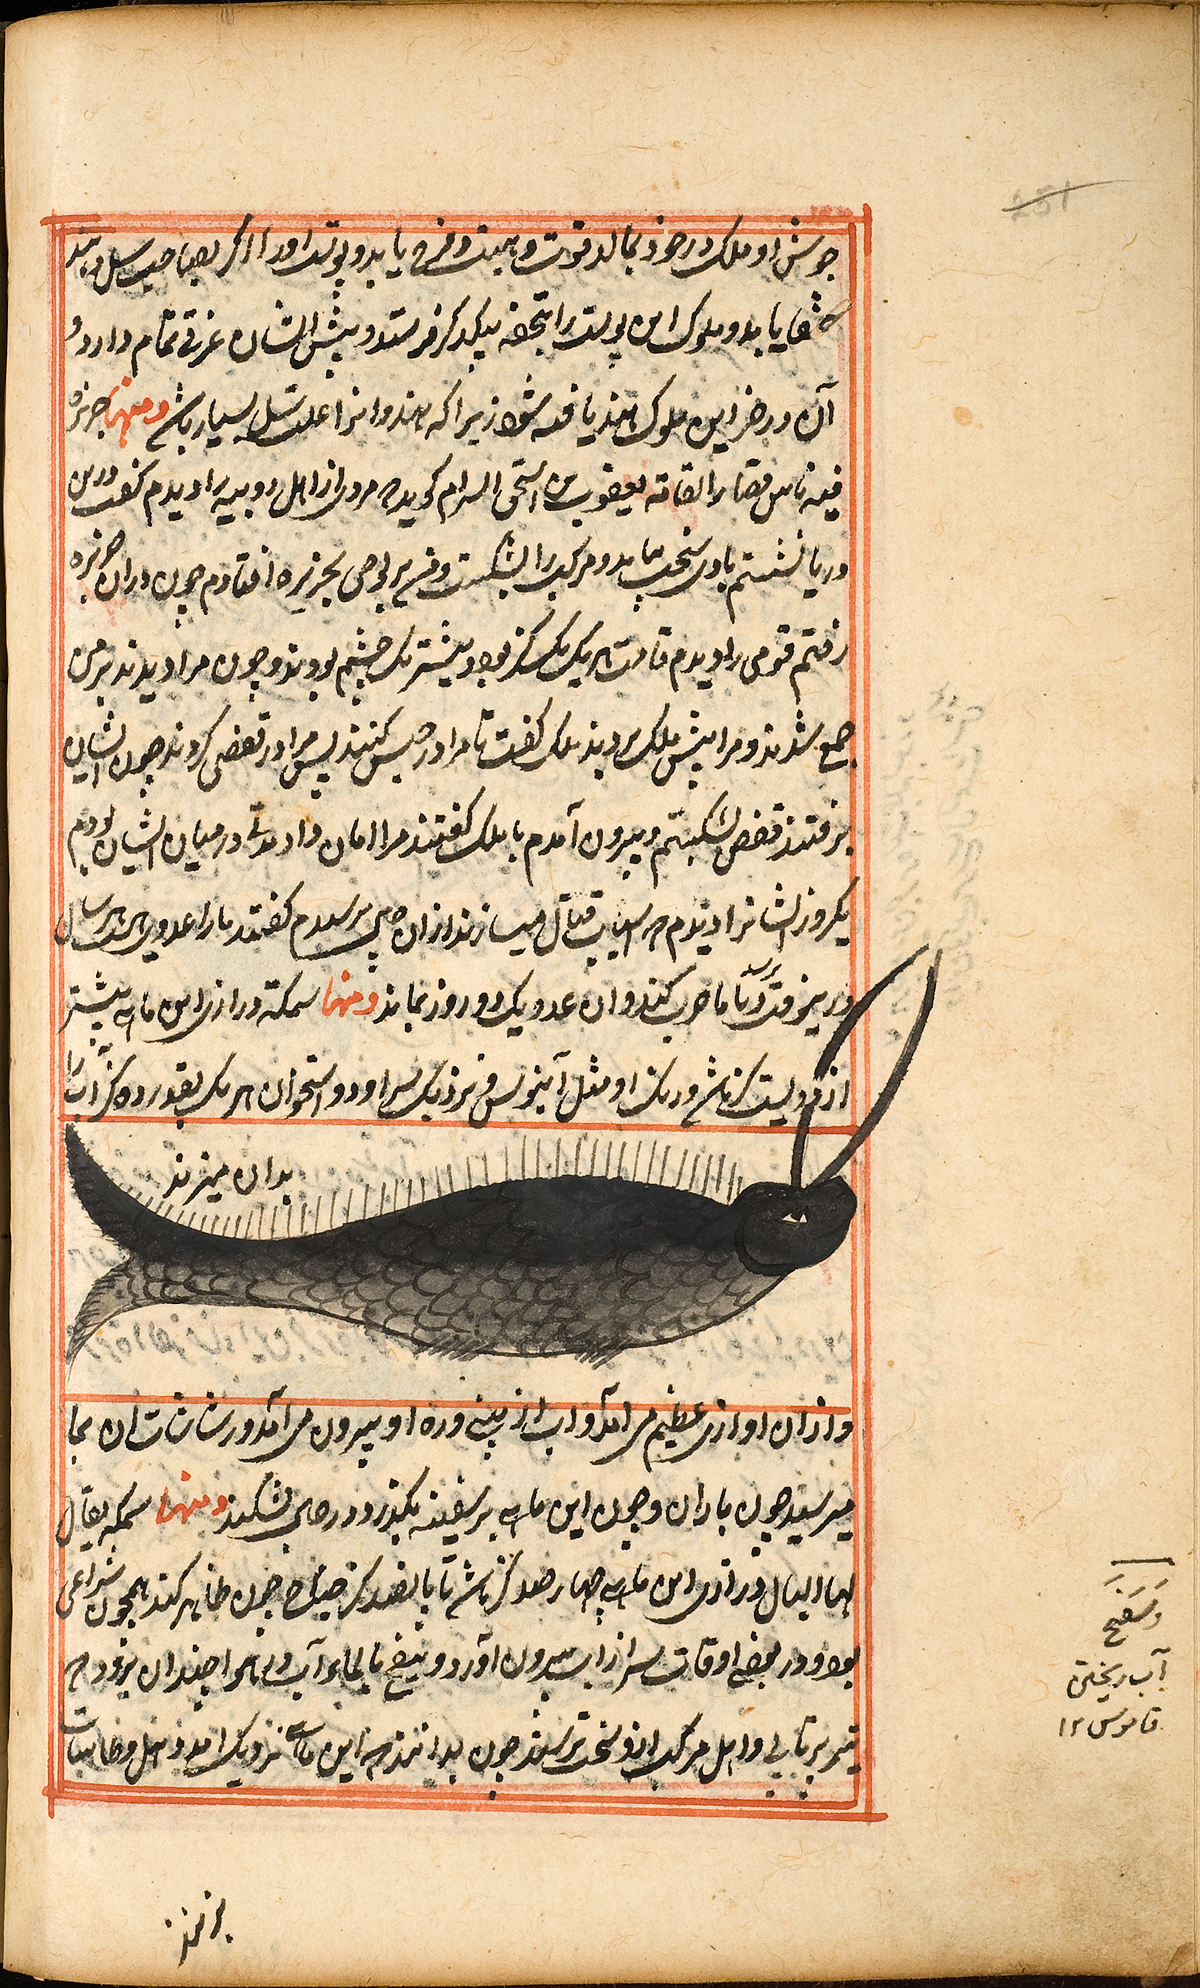 A sea creature with two long tusks pointing upwards, possibly a whale, surrounded by Persian text and a red double ruled border.